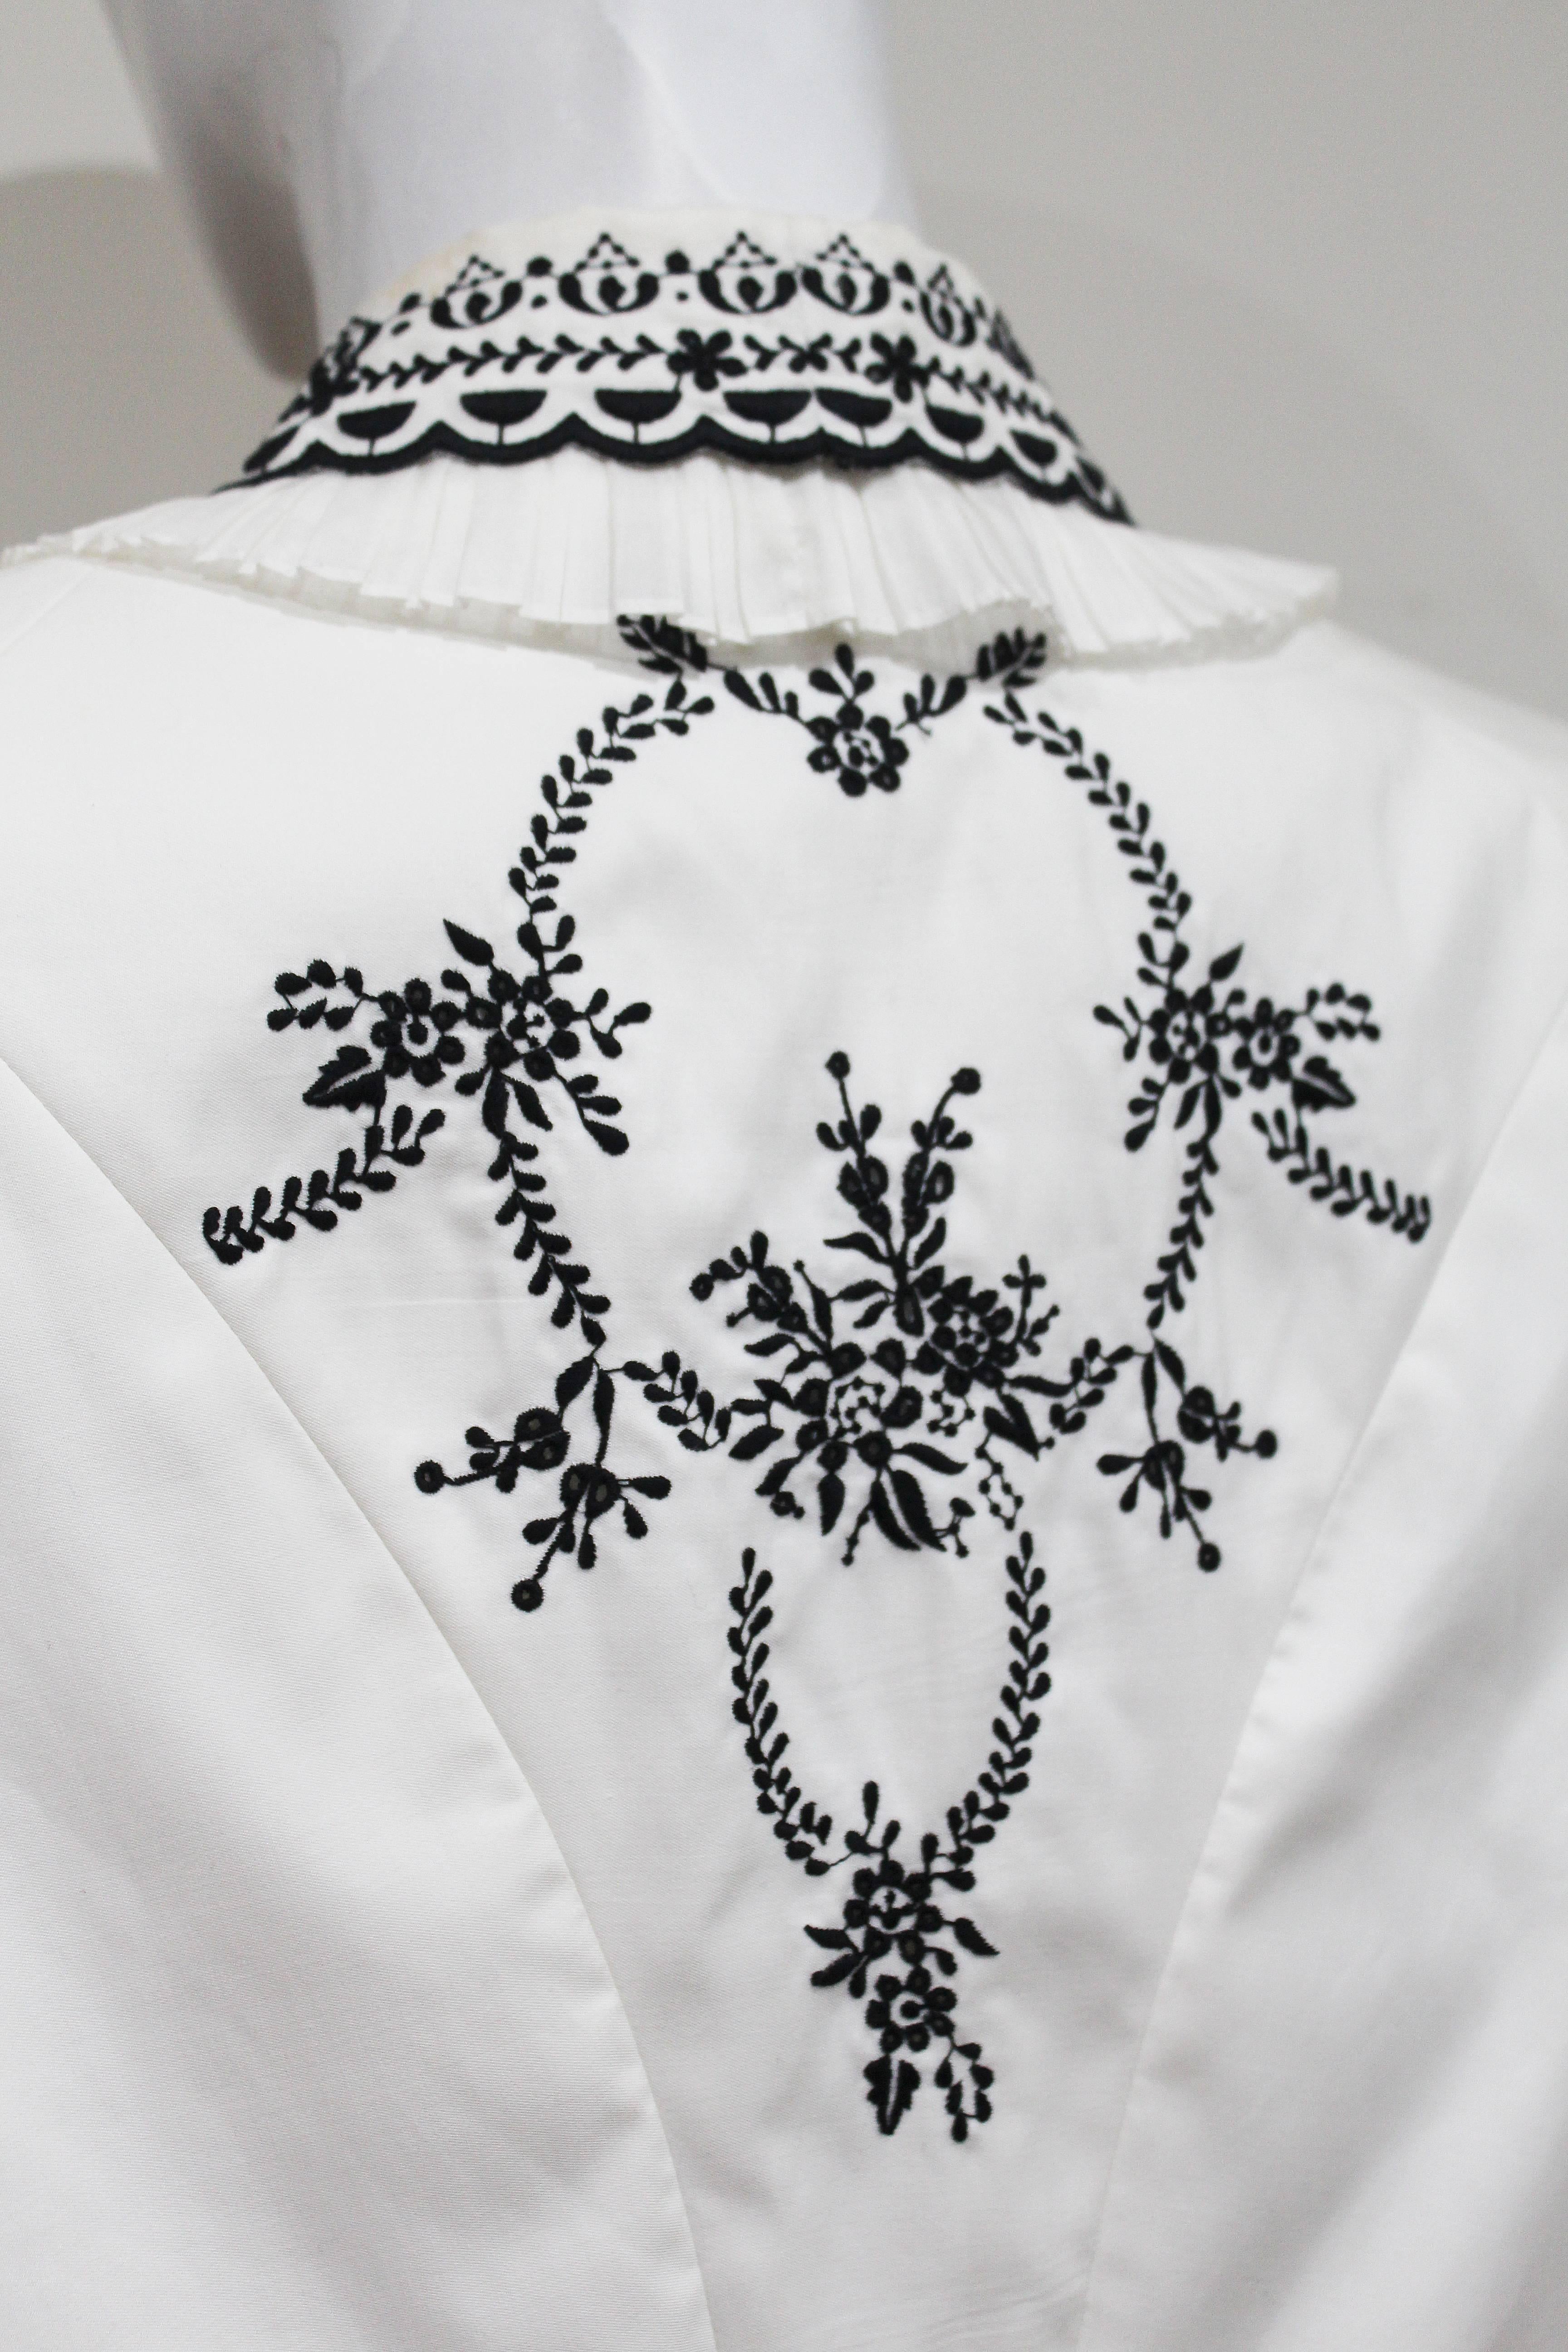 Alexander McQueen embroidered tailored 'Sarabande' jacket, c. 2007 For Sale 1